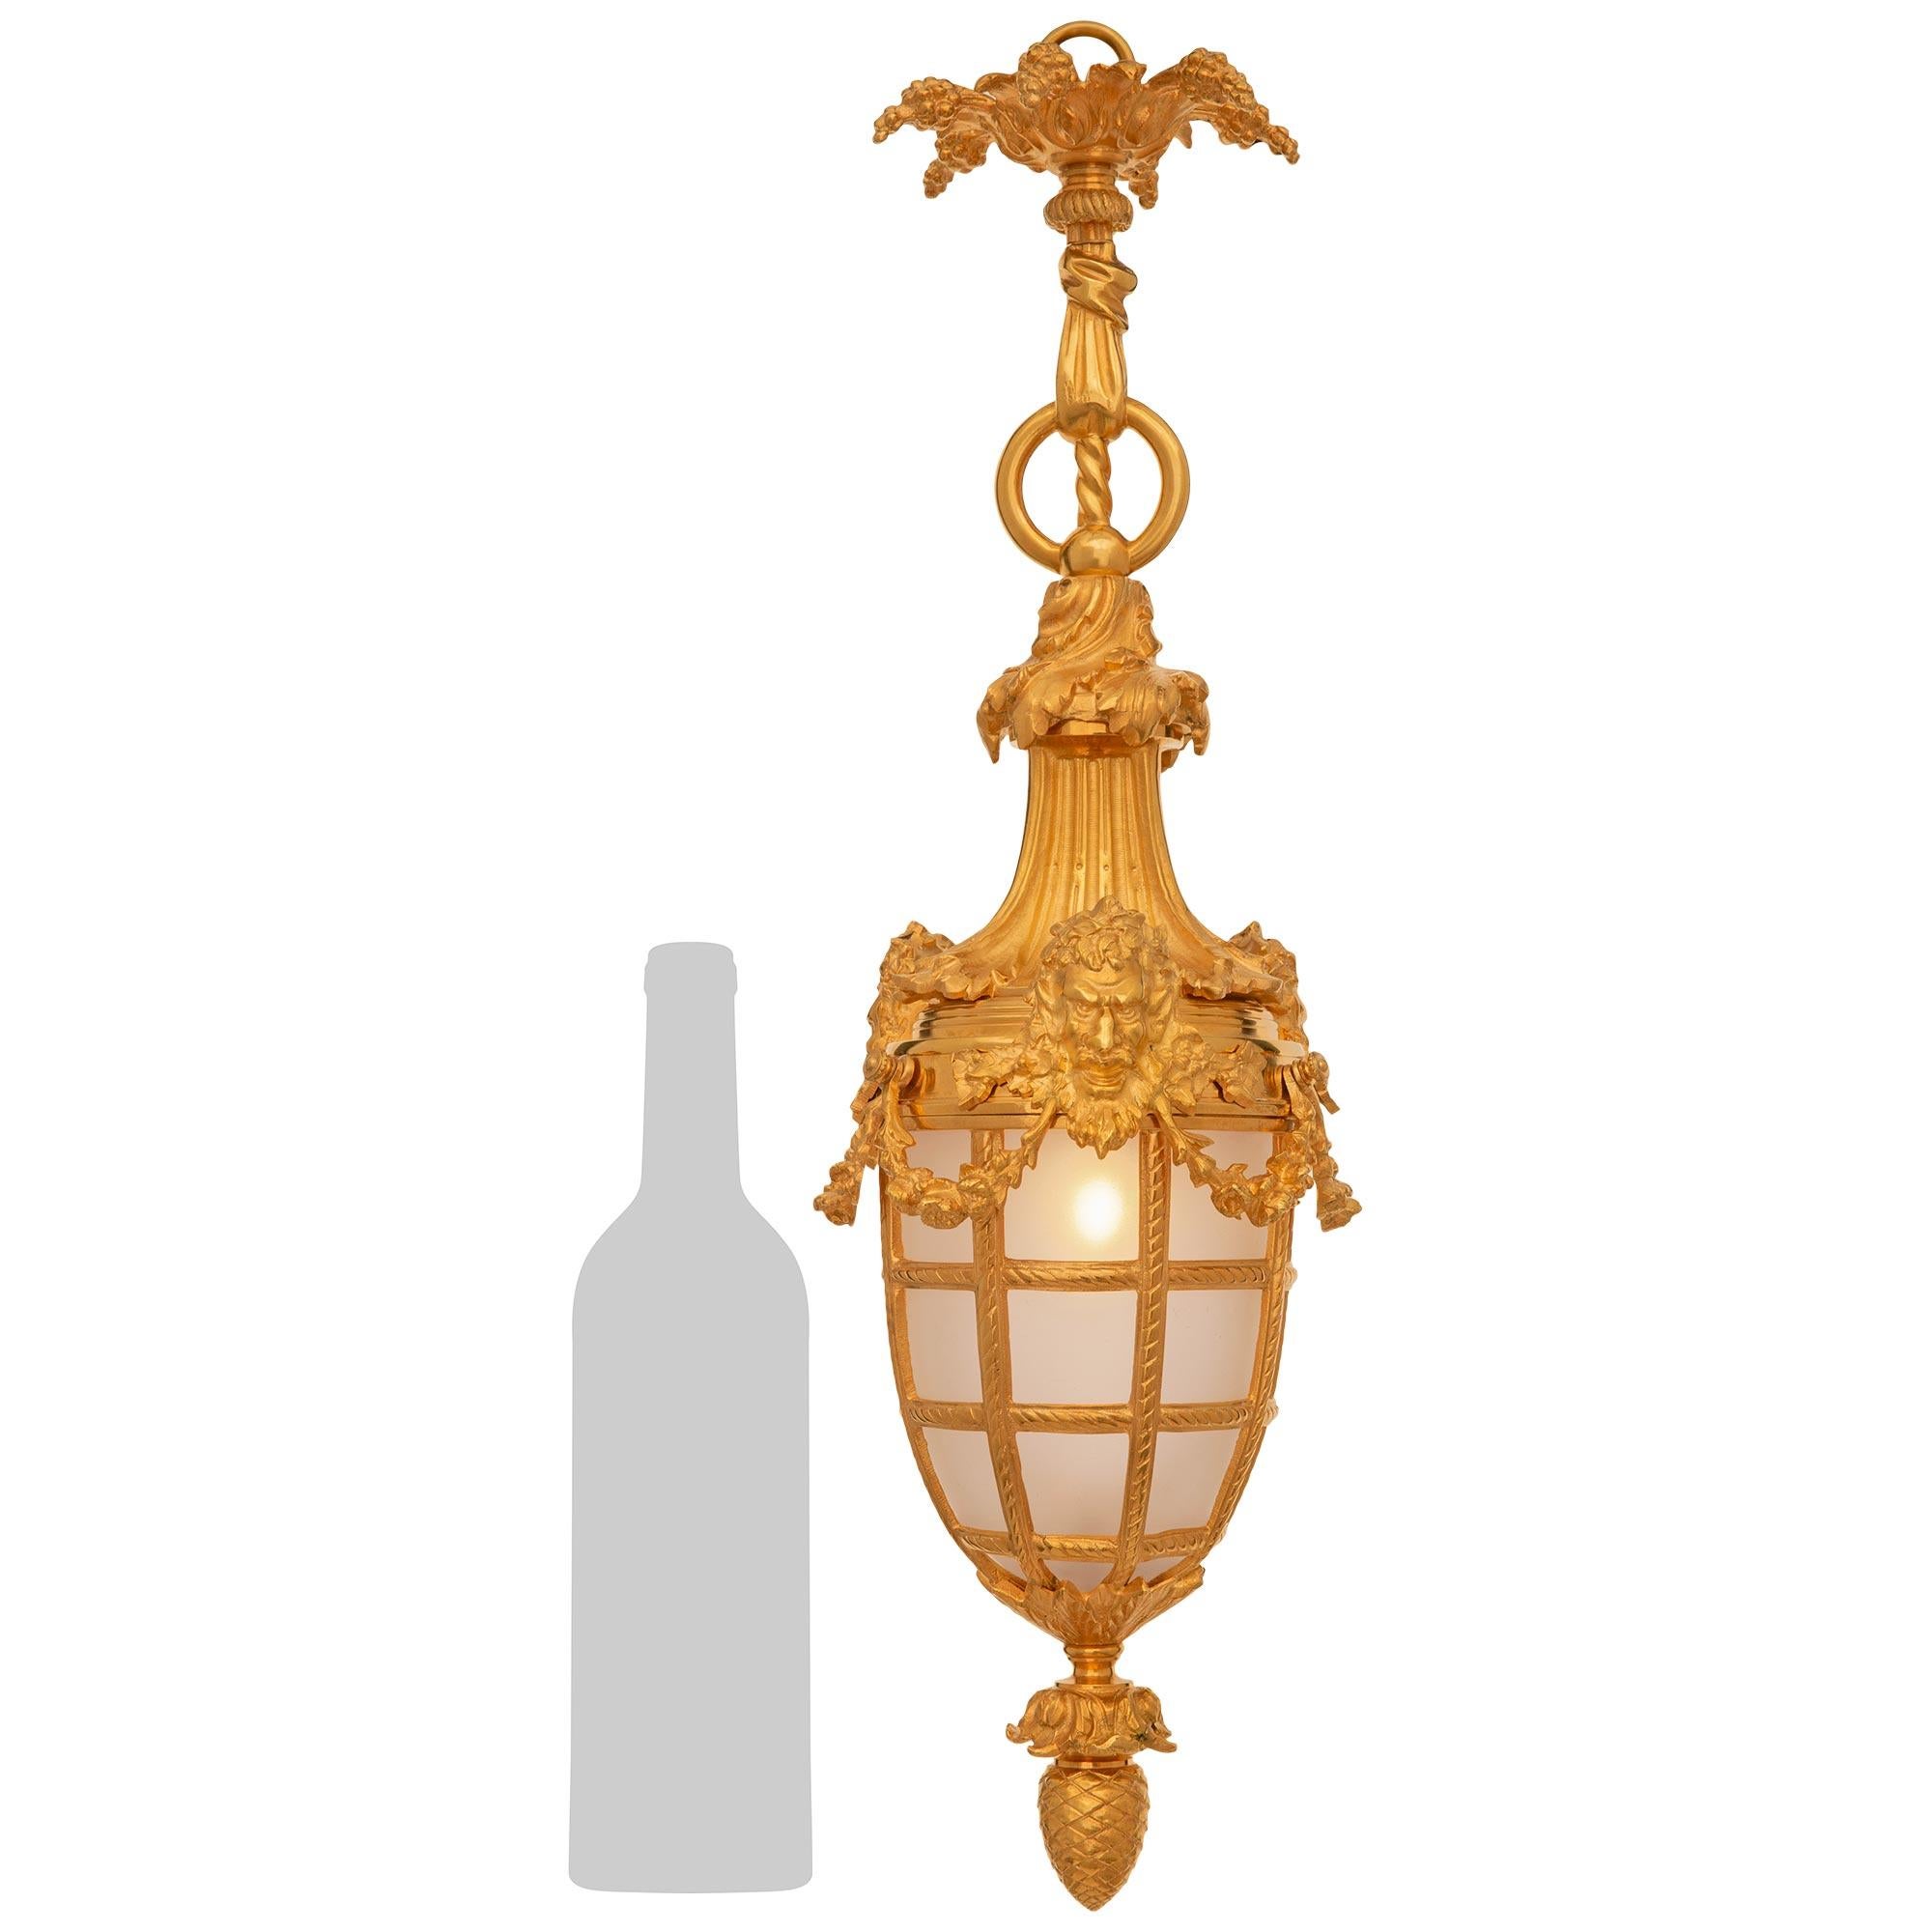 An elegant and most unique French 19th century Louis XVI st. Ormolu and frosted glass lantern. This wonderfully decorative lantern is decorated by a bottom inverted acorn finial. Above is a spiral fluted Ormolu mount that holds the original frosted